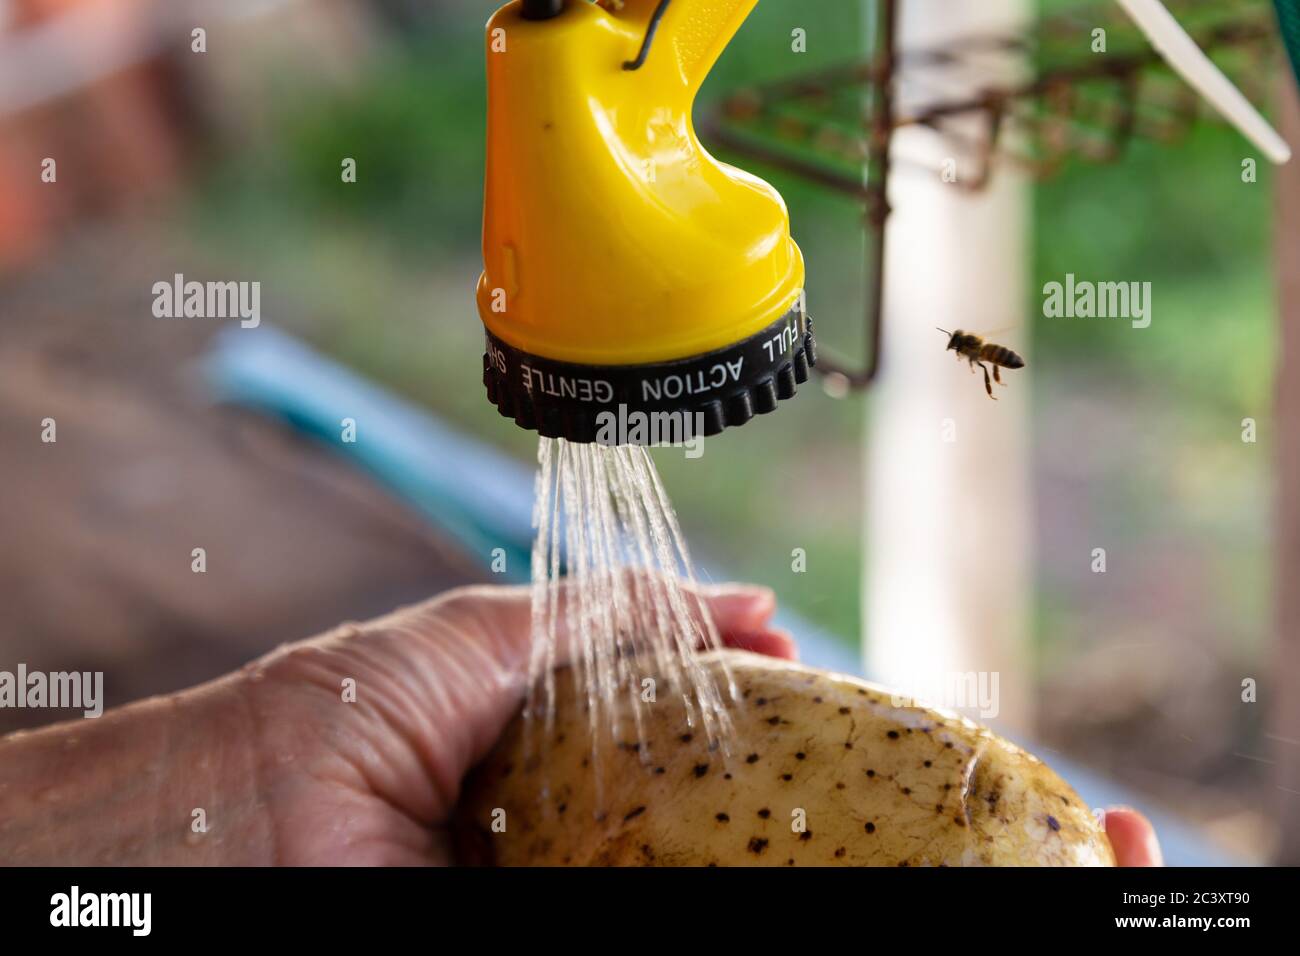 Asuncion, Paraguay. 22nd June, 2020. A woman washes a potato while a solitary bee approaches a garden hose nozzle, aka pressure spray water gun in search of water to drink, Asuncion, Paraguay. The connection between honey bees and humans is limitless. Bees allow plants to reproduce through pollination. Plants contribute to the food system by feeding animals - aside from humans - such as birds and insects. Stock Photo